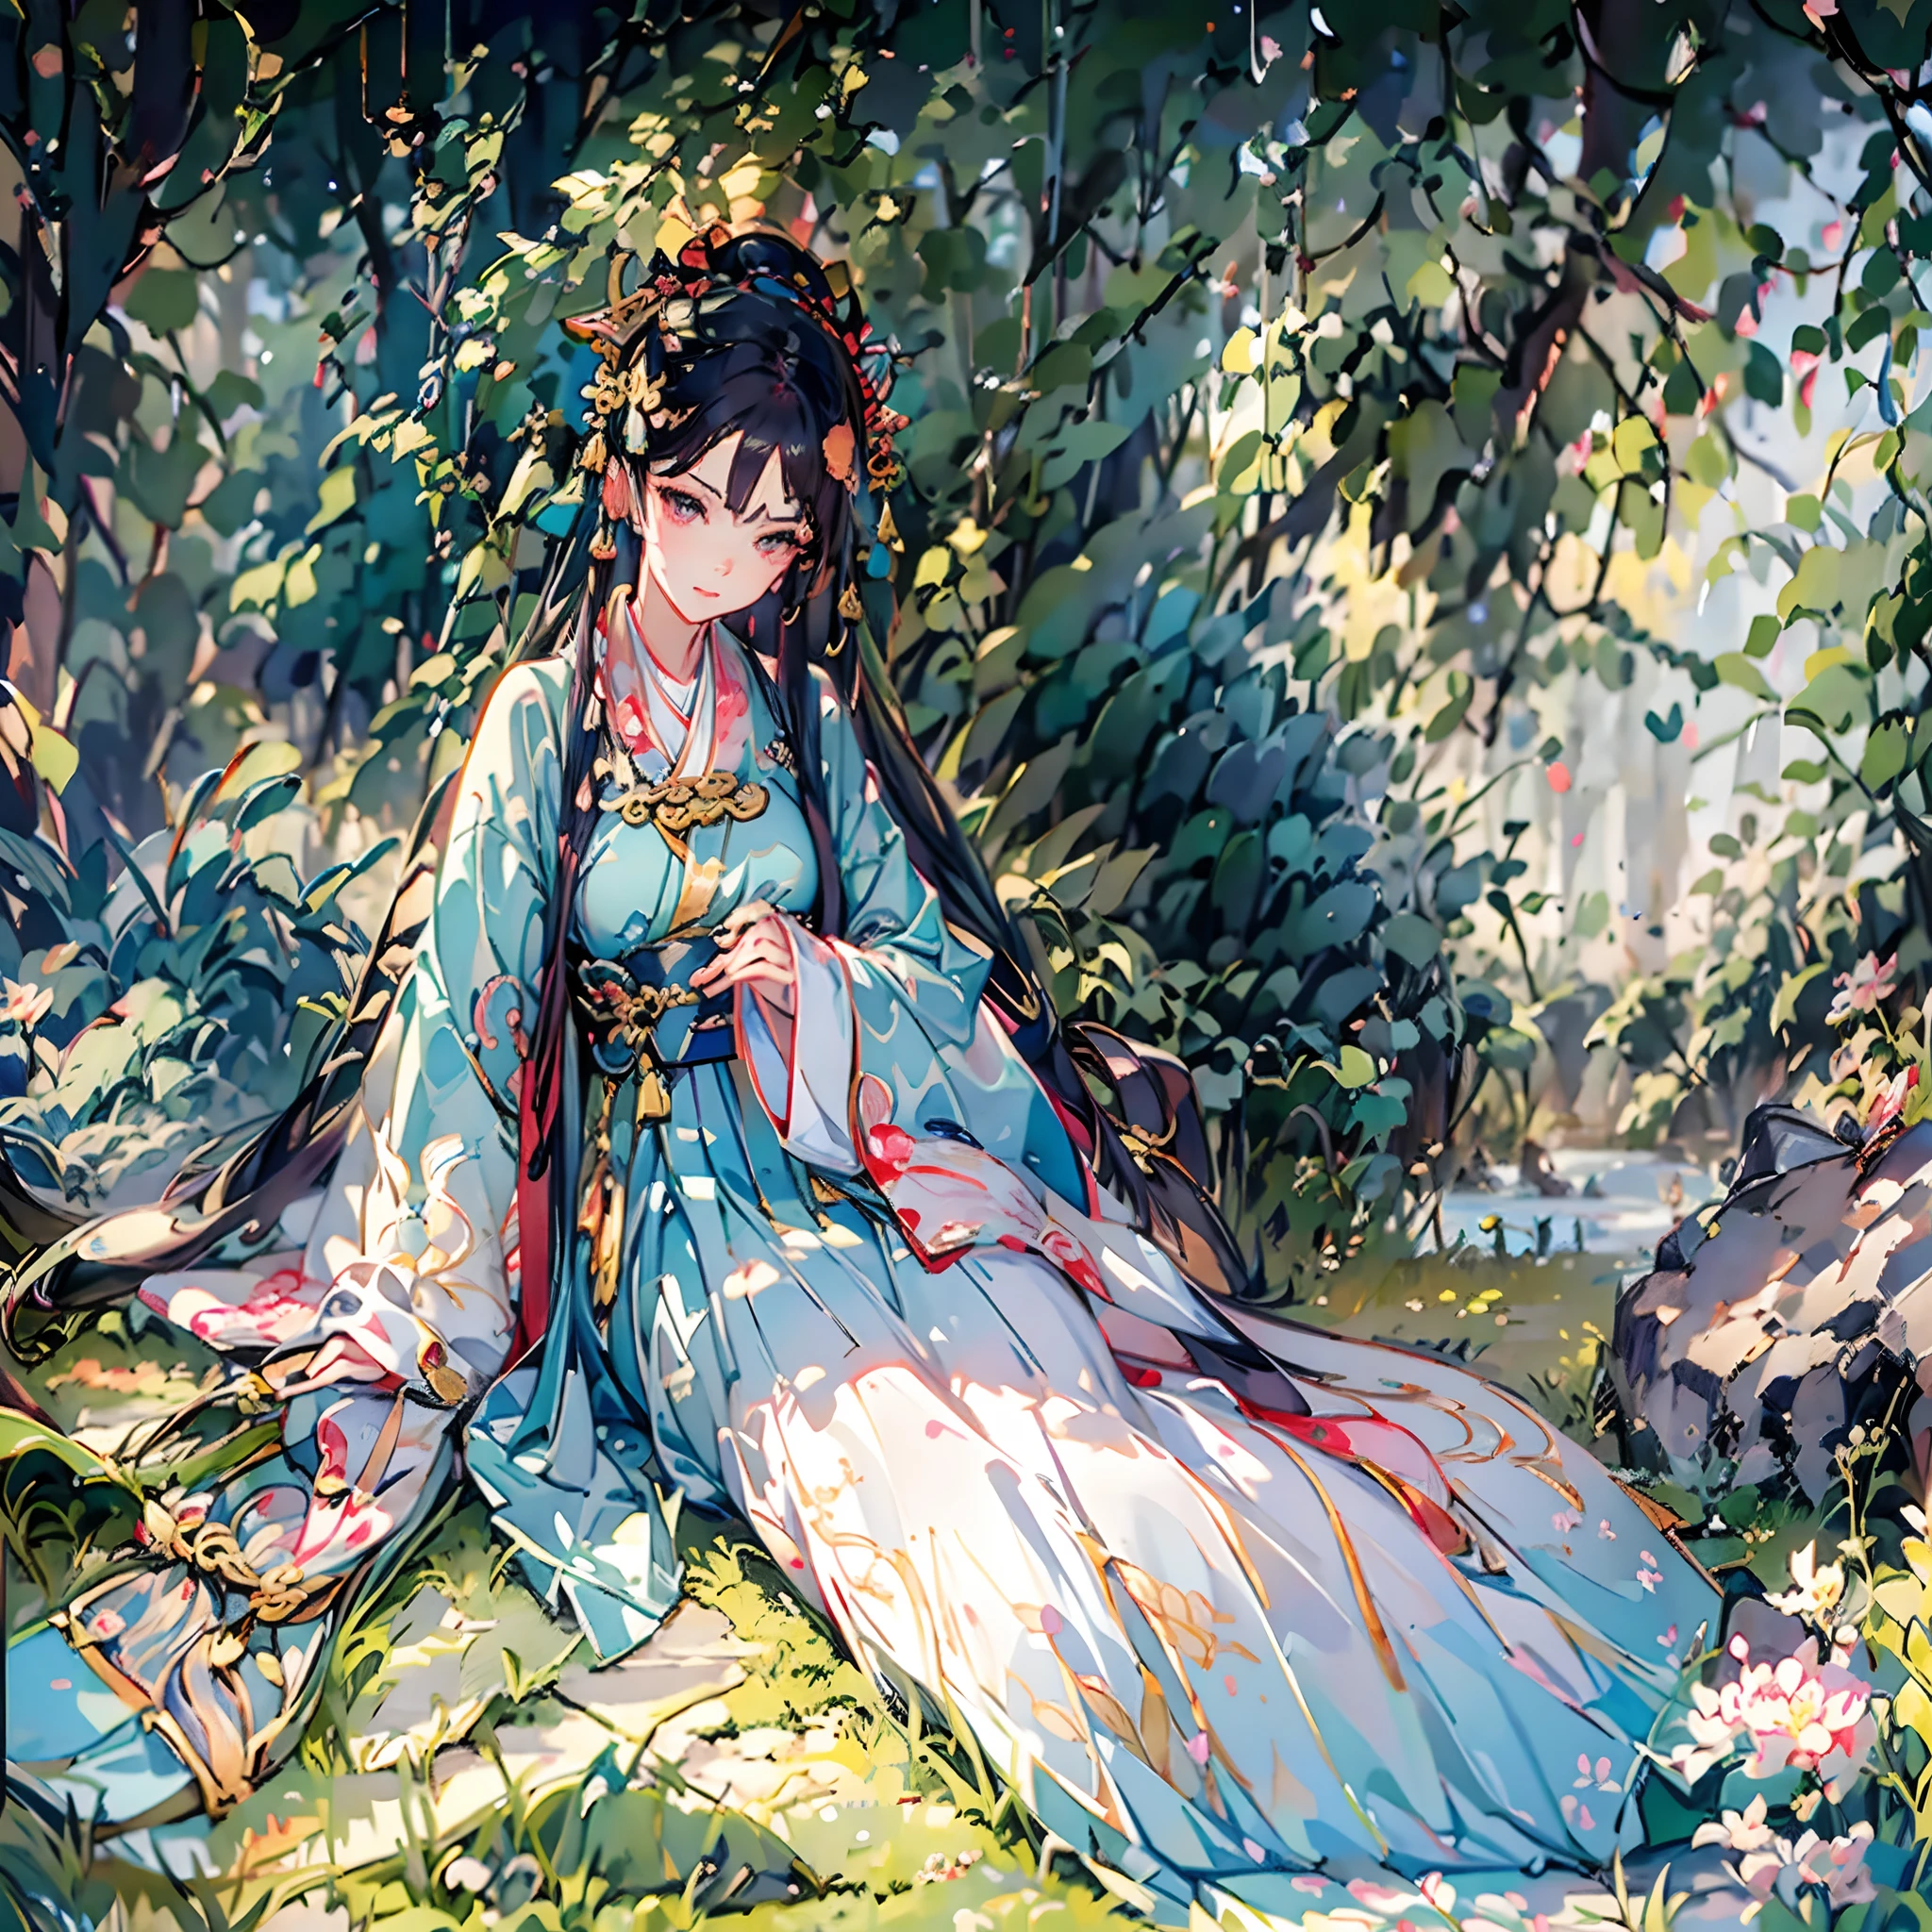 Anime - style image of woman in kimono clothes sitting on a rock, palatial palace ， a girl in hanfu, white haired god, portrait onmyoji, Trending on ArtStation pixiv, guweiz on pixiv artstation, anime style 4 k, Anime art wallpaper 8k, guweiz on artstation pixiv, anime art wallpaper 4k